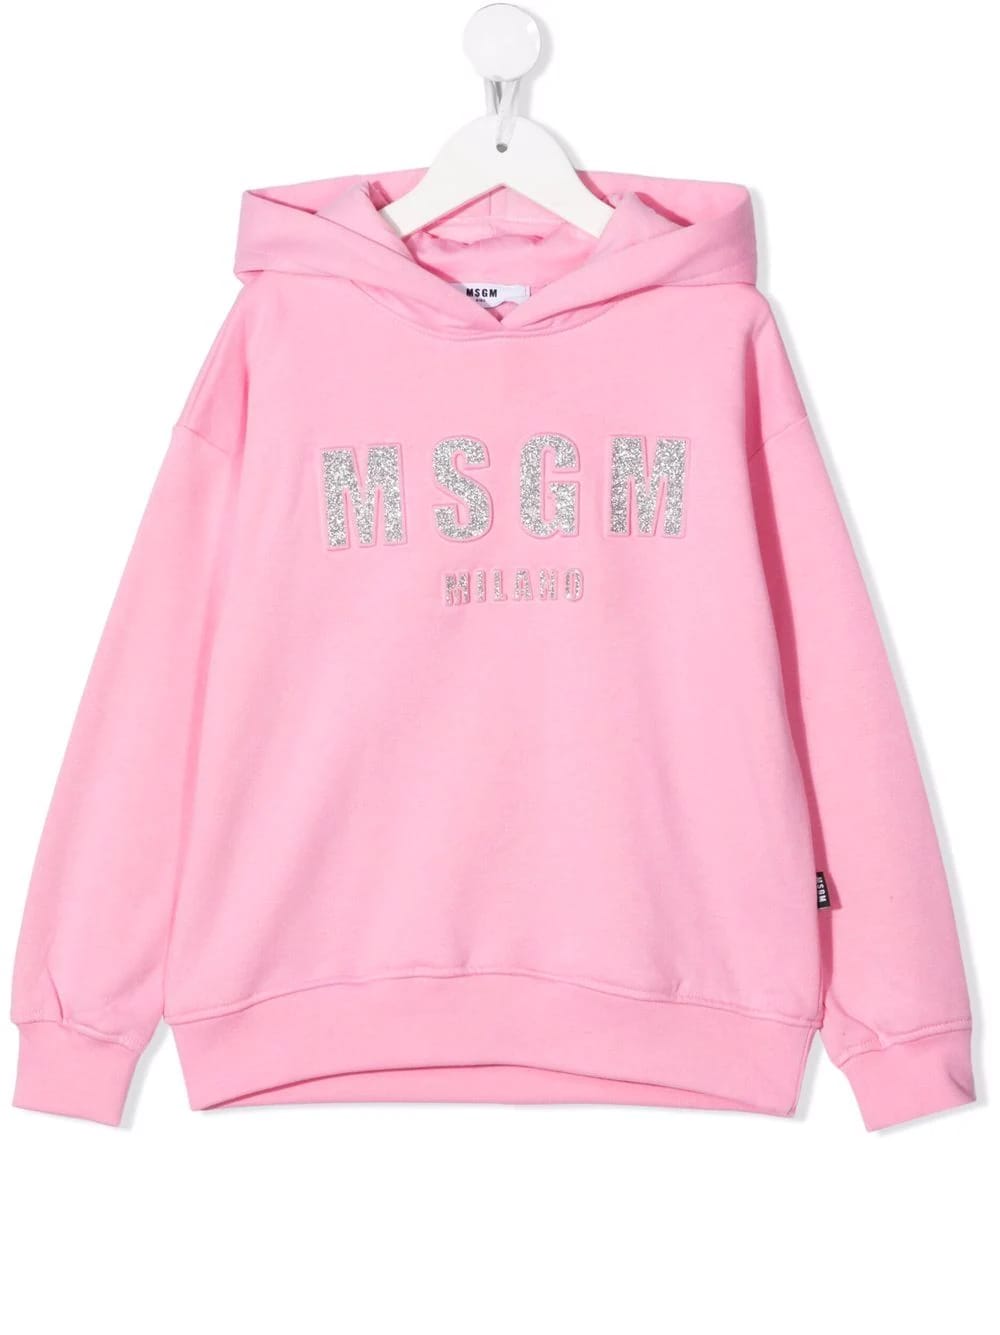 MSGM Kids Pink Hoodie With Silver Glitter Logo